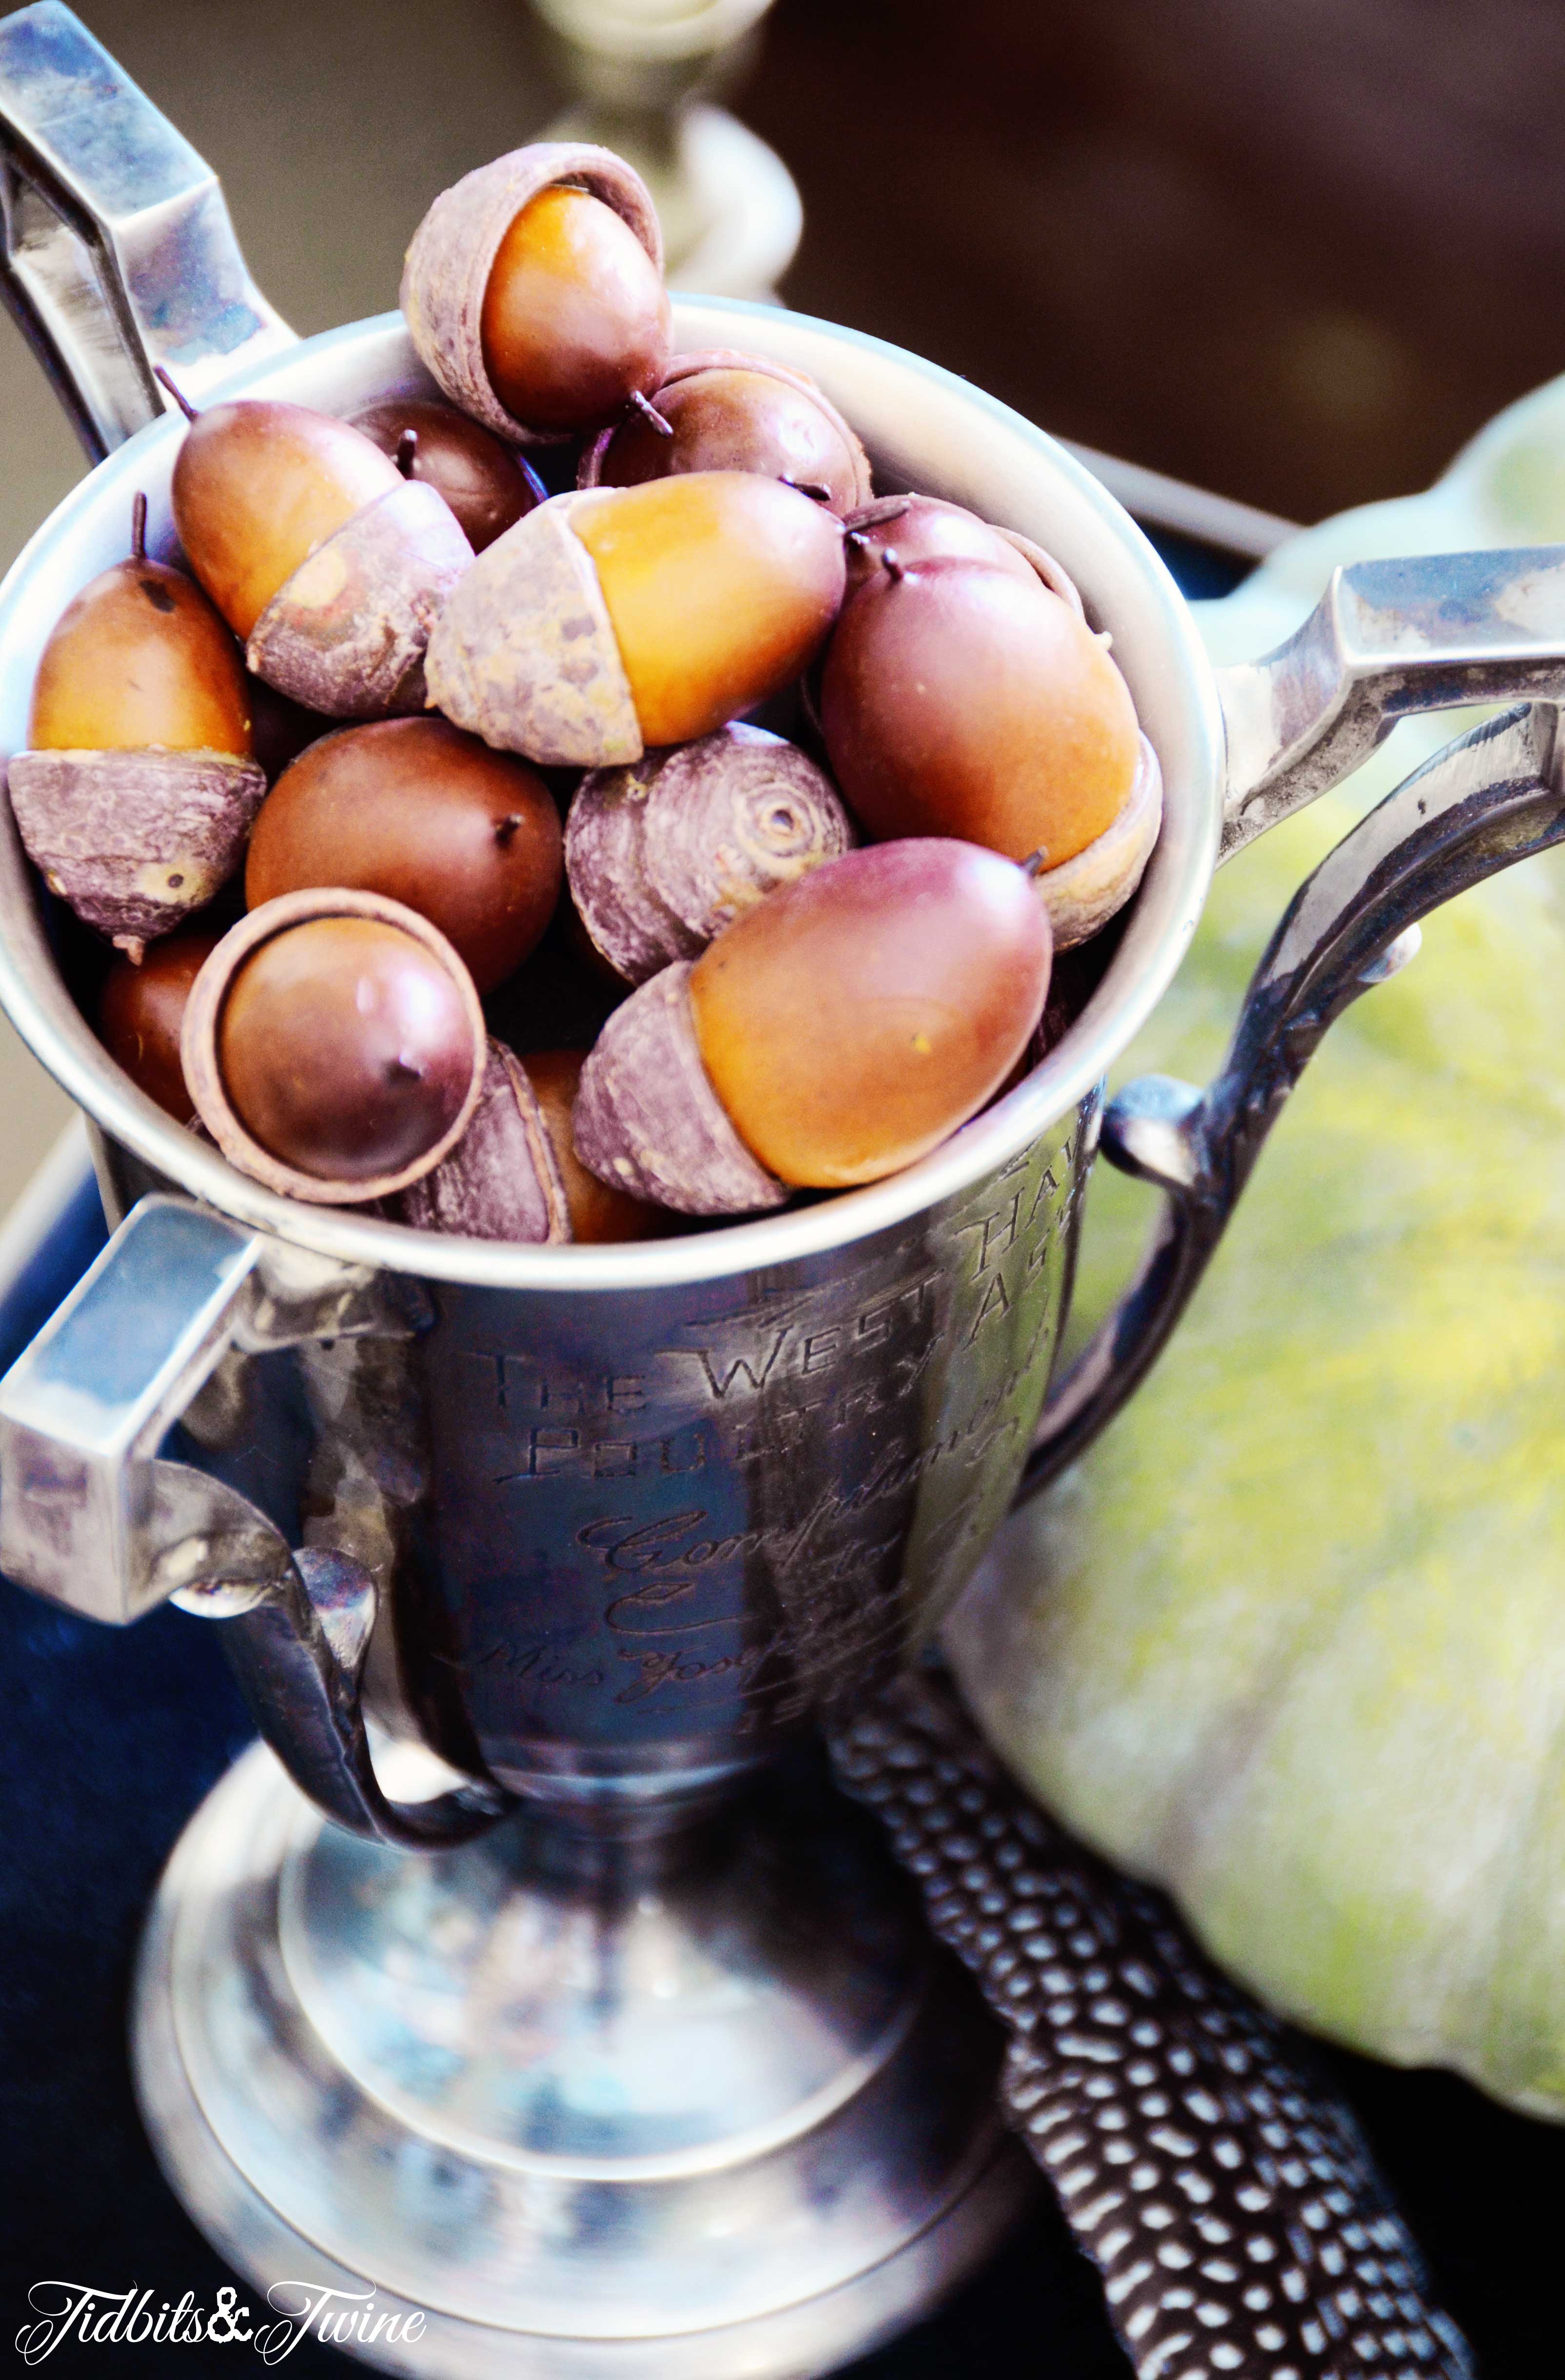 Fall acorns in a vintage trophy cup - Fall decorating ideas